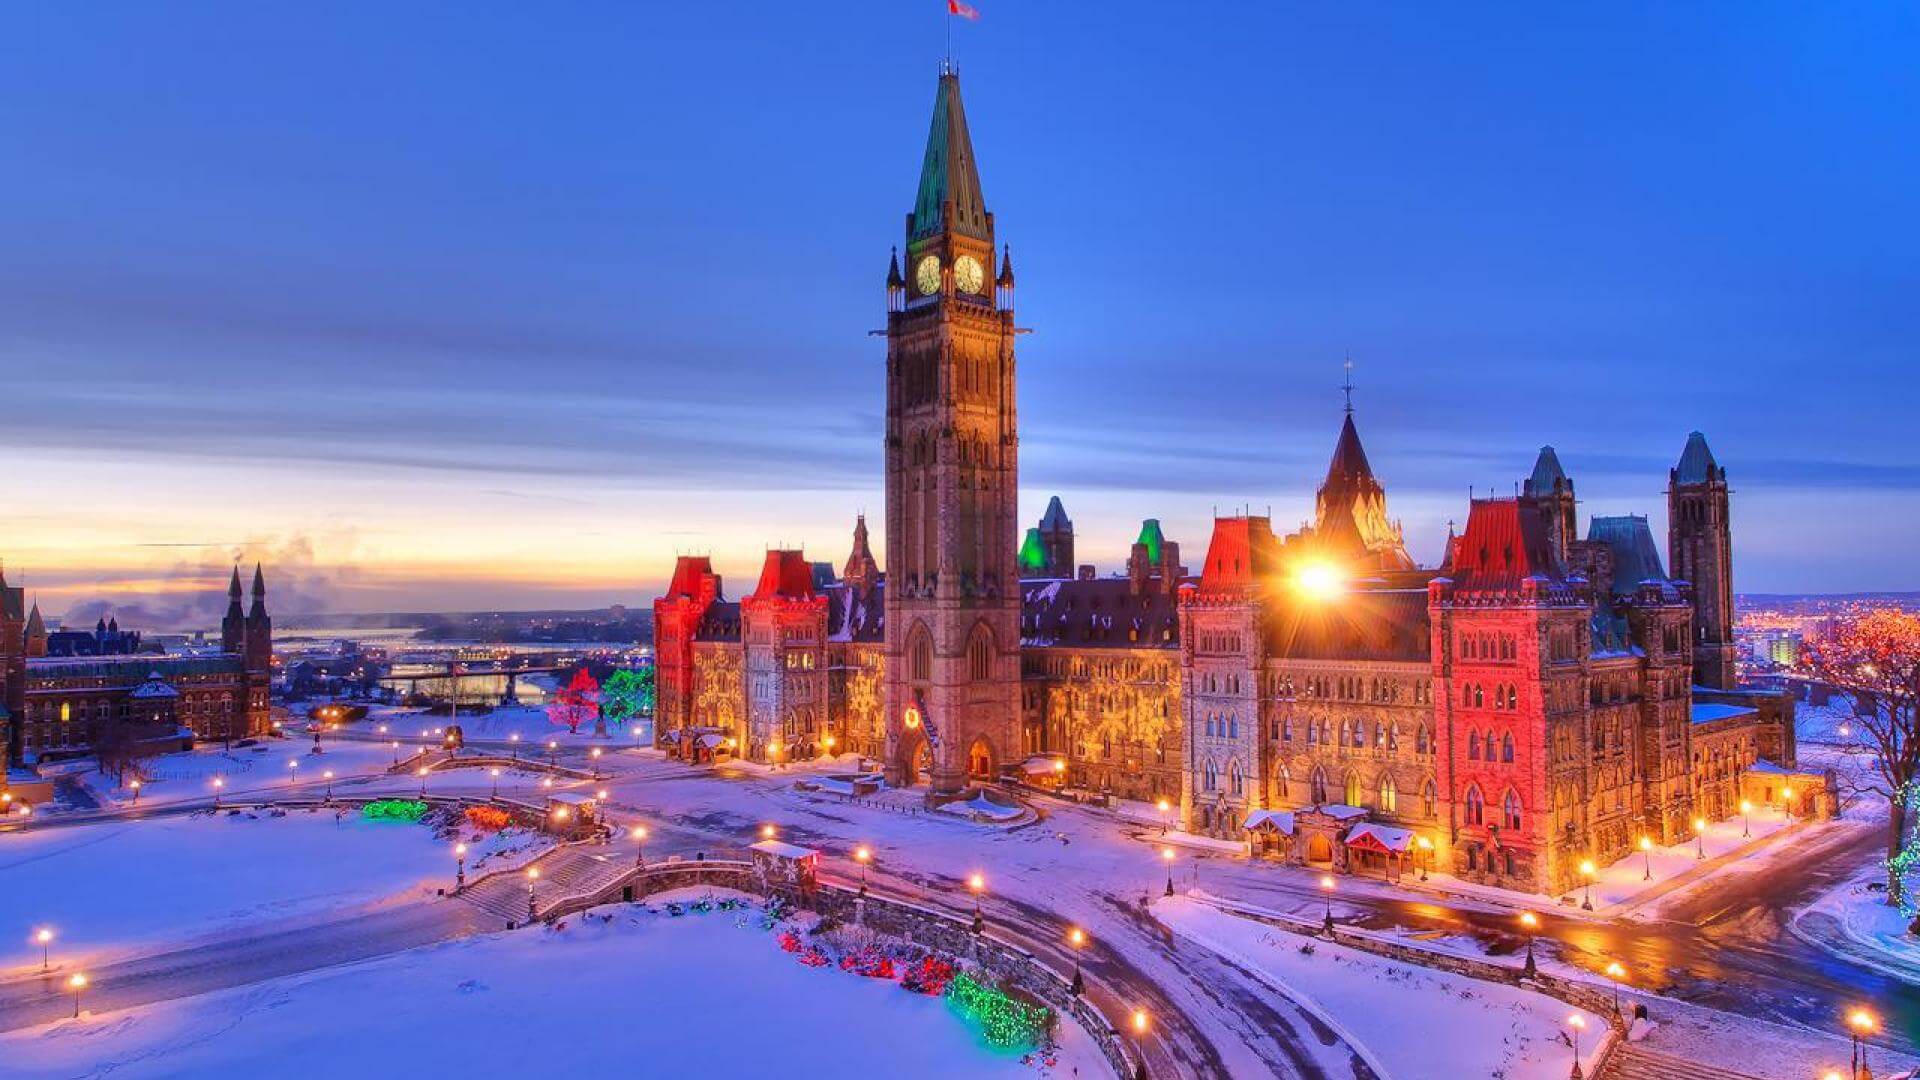 Winter Canada 5 Star Holiday Travel & Tour Package